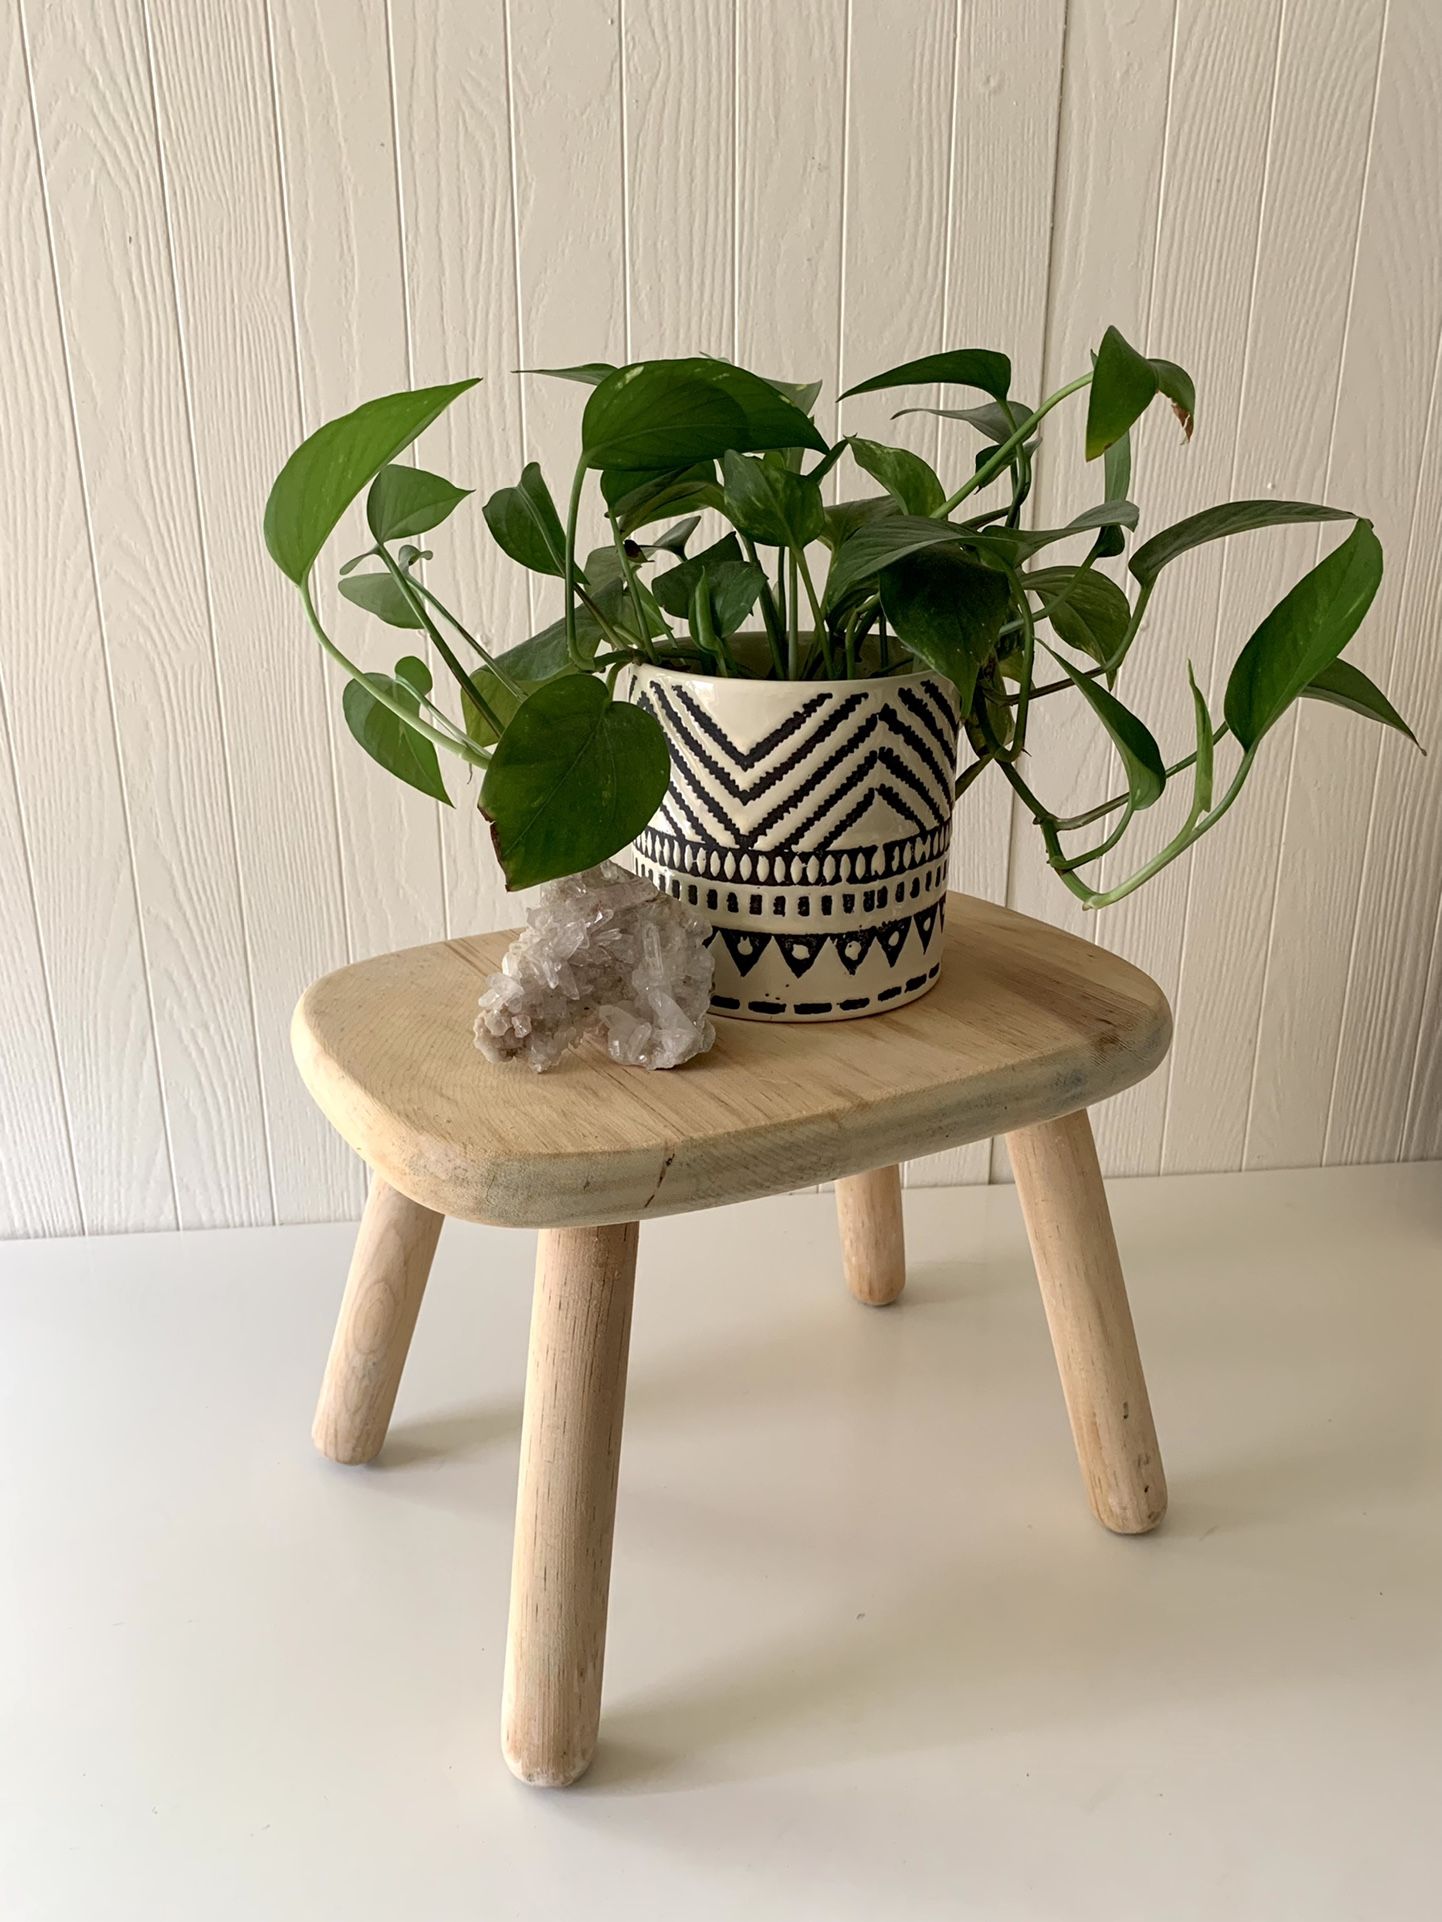 Wooden Farmers Stool Vintage Wooden Footstool Wood Plant Stand Boho Bench Decor Bohemian Chic